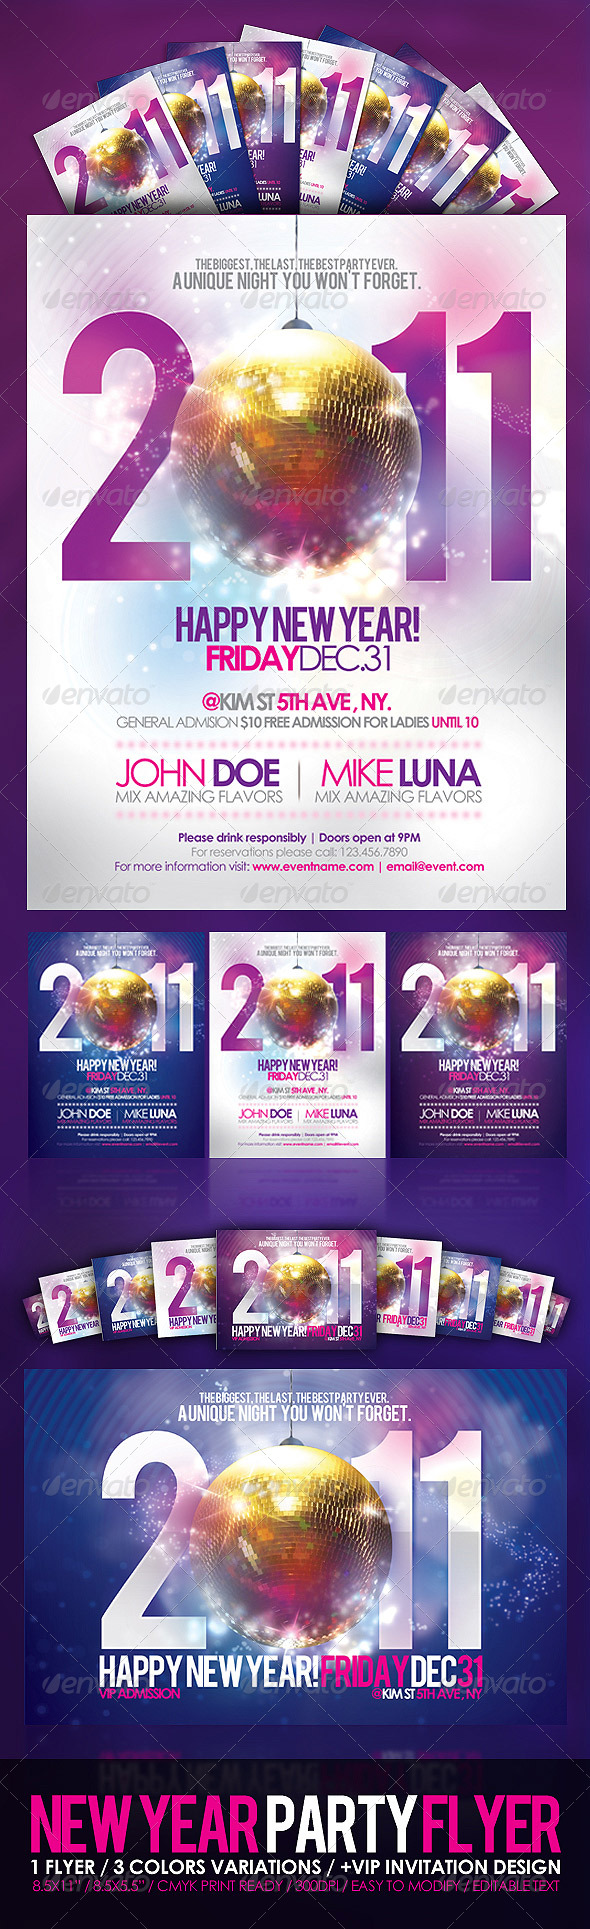 GraphicRiver - Happy New Year Party Flyer